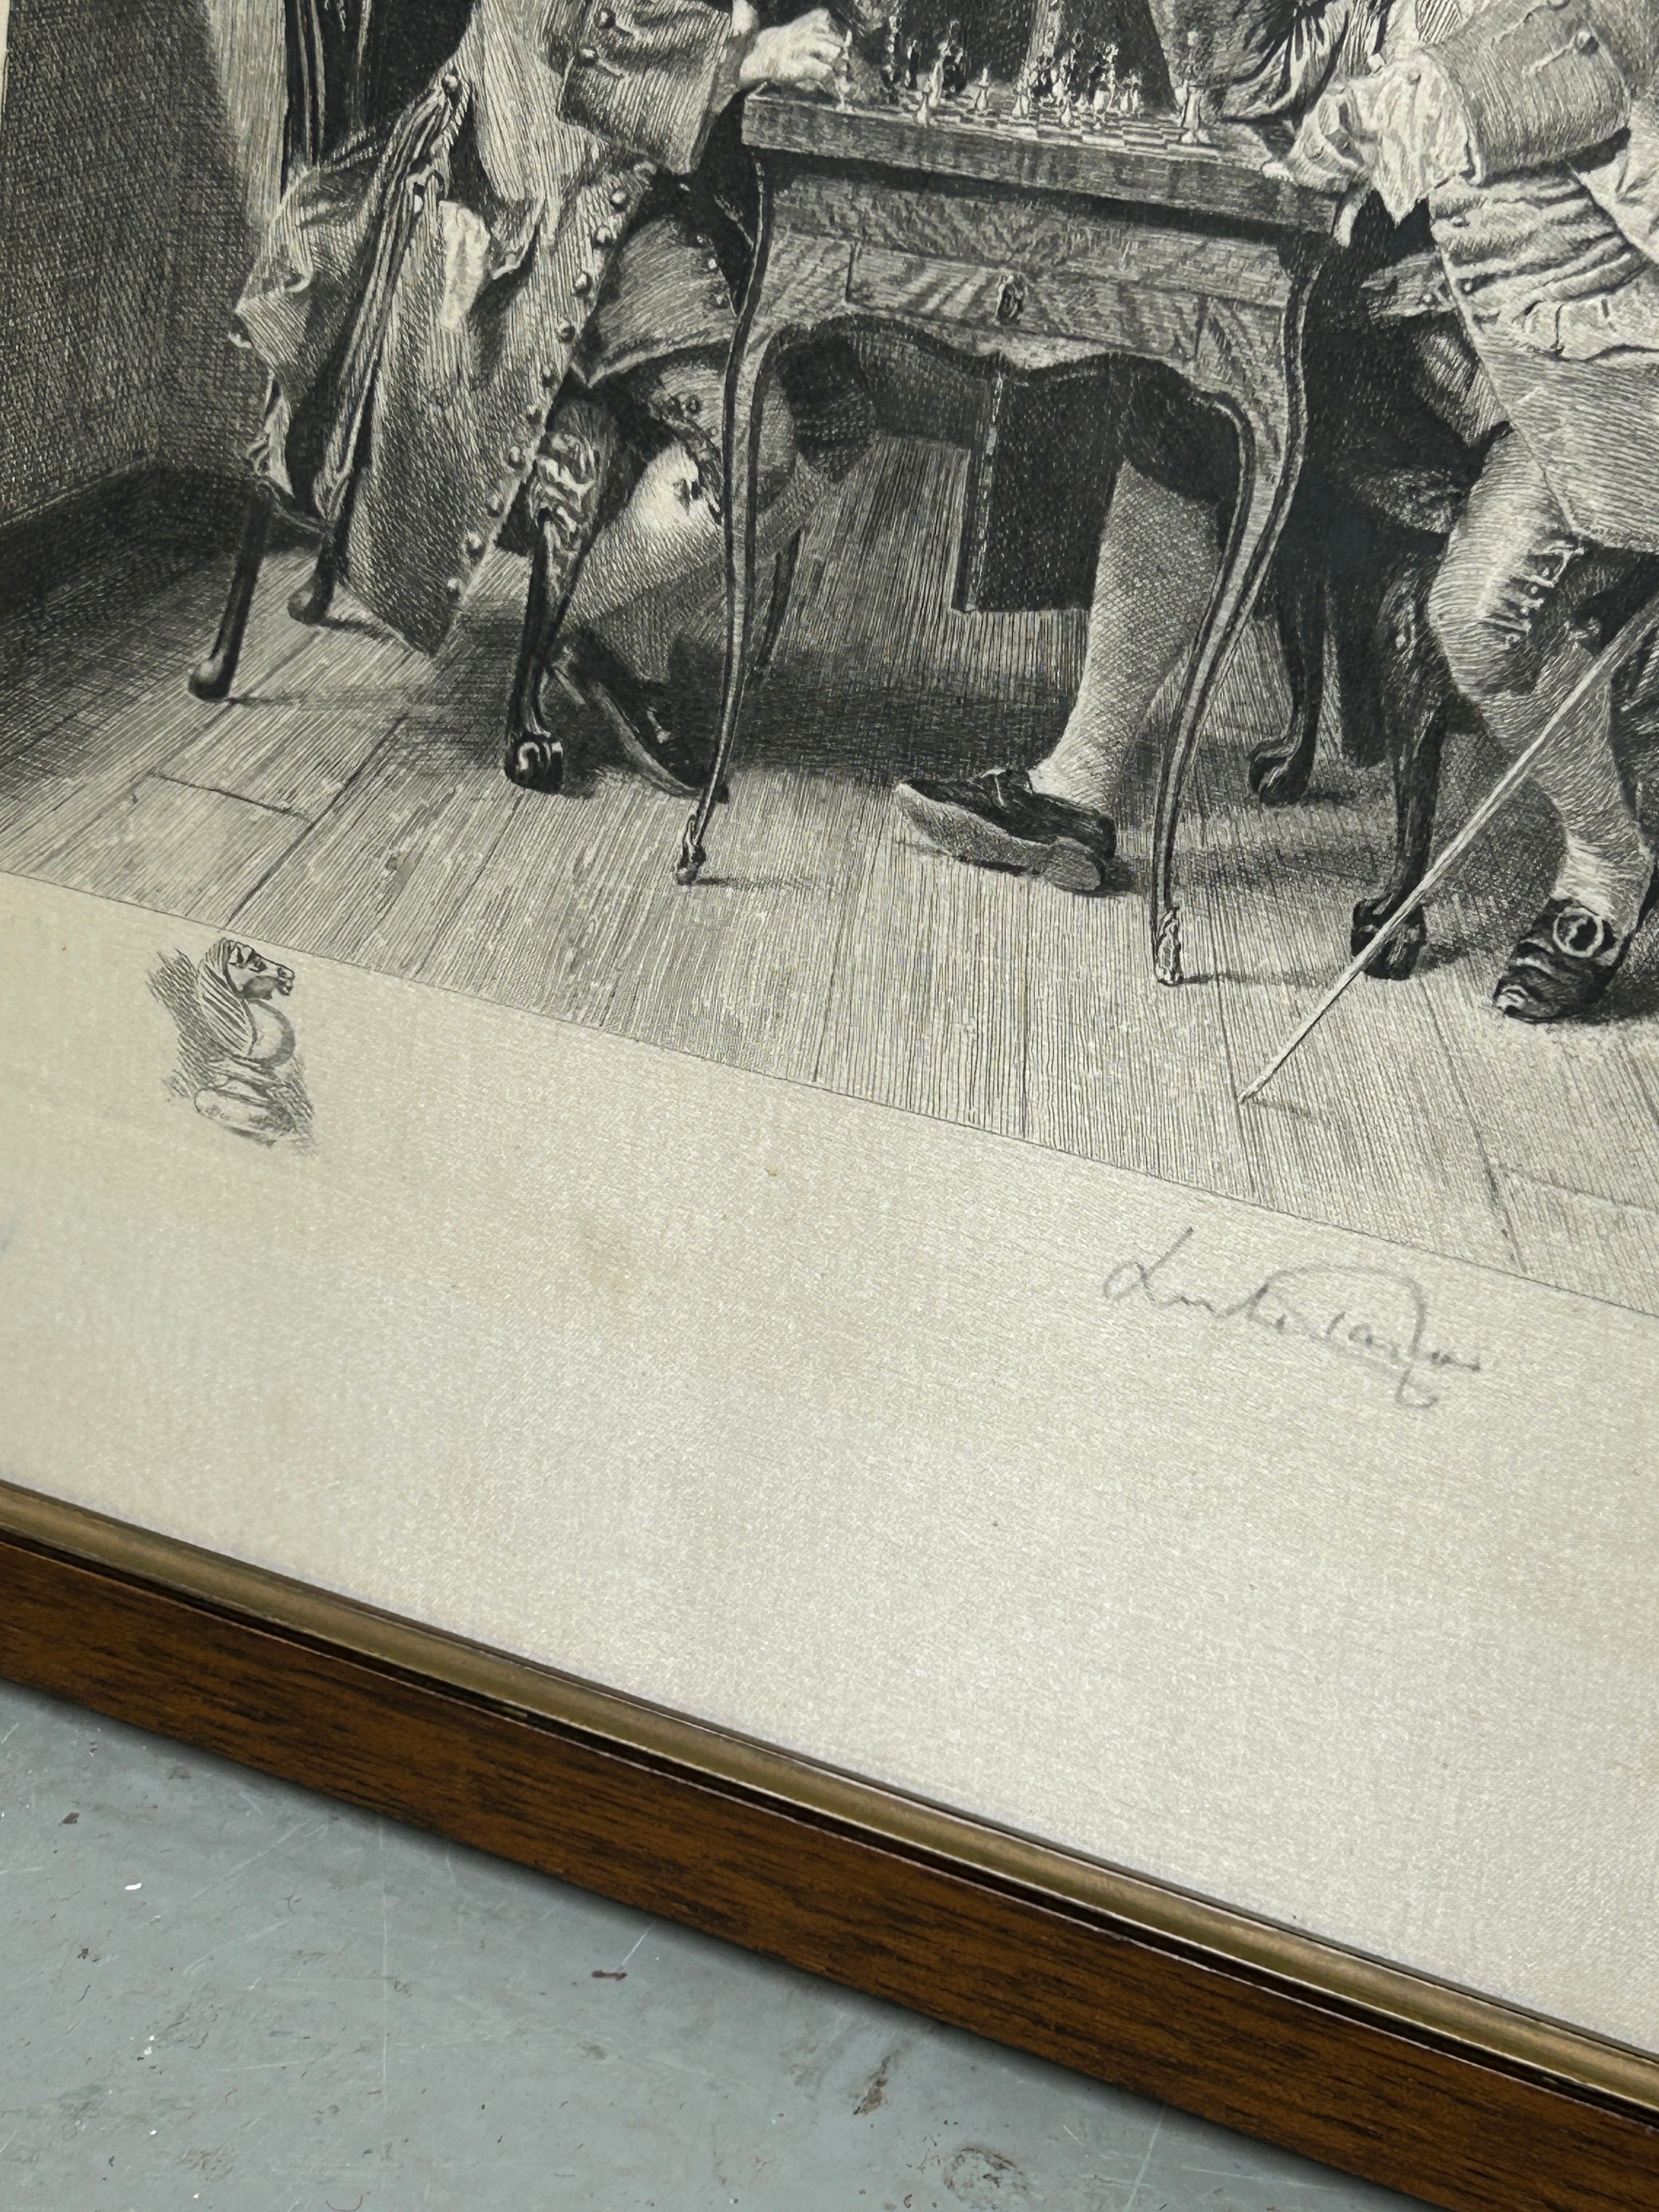 A PRINT OF TWO GENTLEMAN PLAYING CHESS, Signed in pencil bottom right, mounted in a frame and - Image 2 of 3